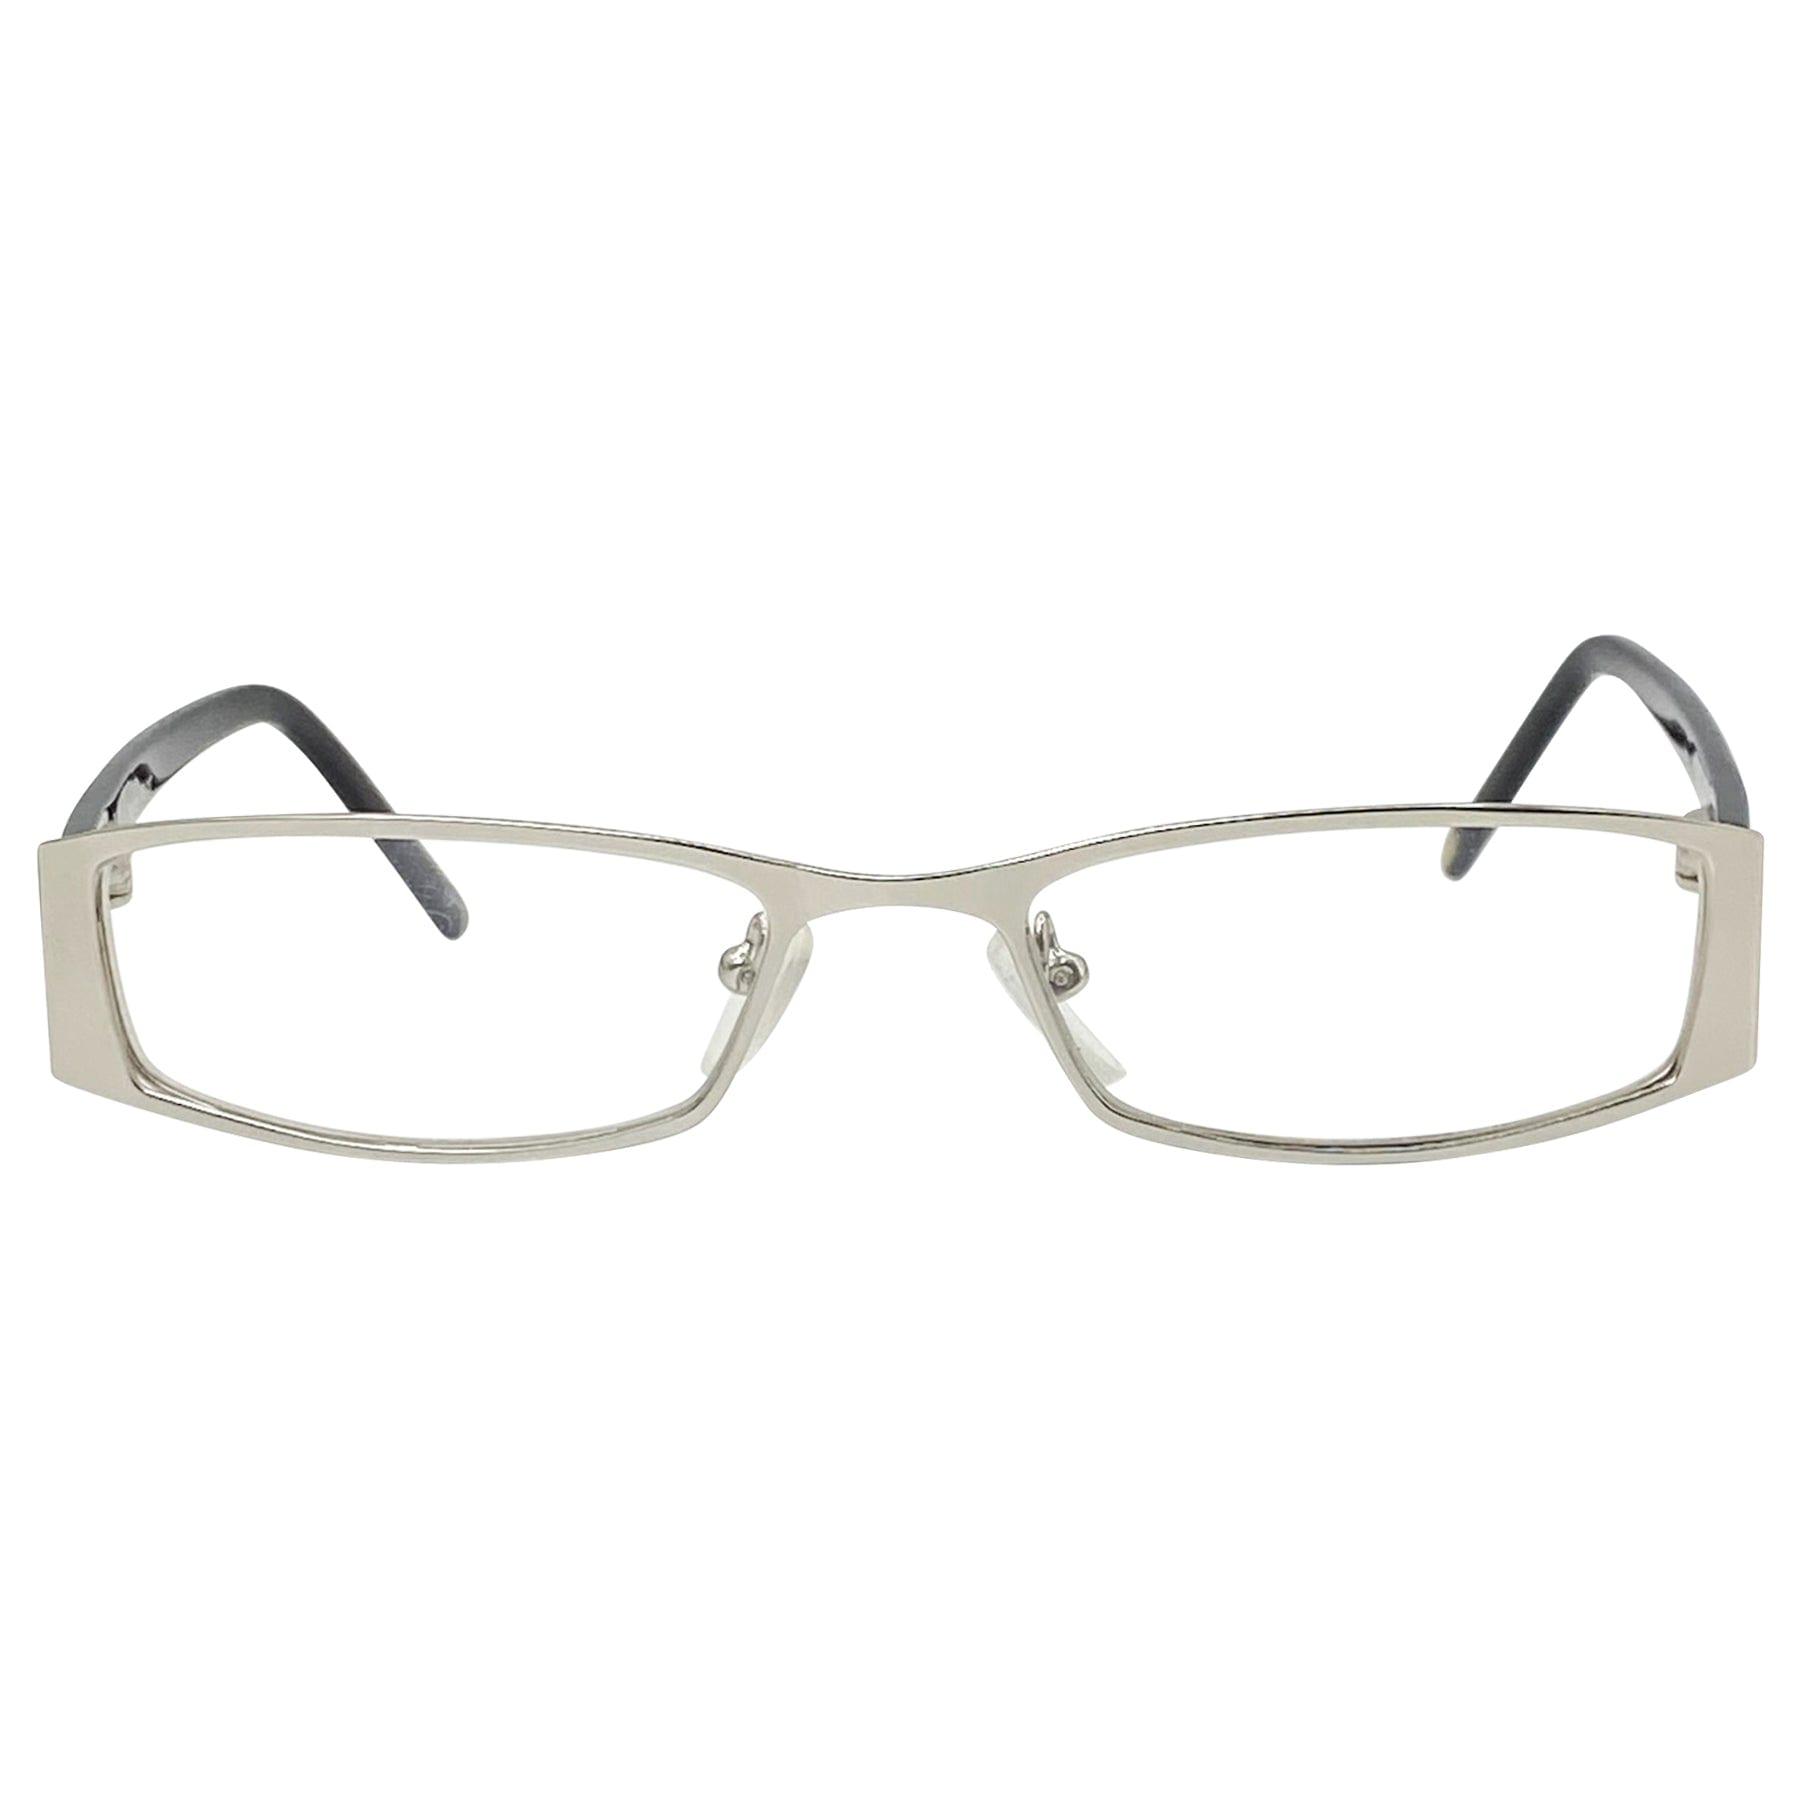 clear silver metal with a rectangular 90s retro style frame